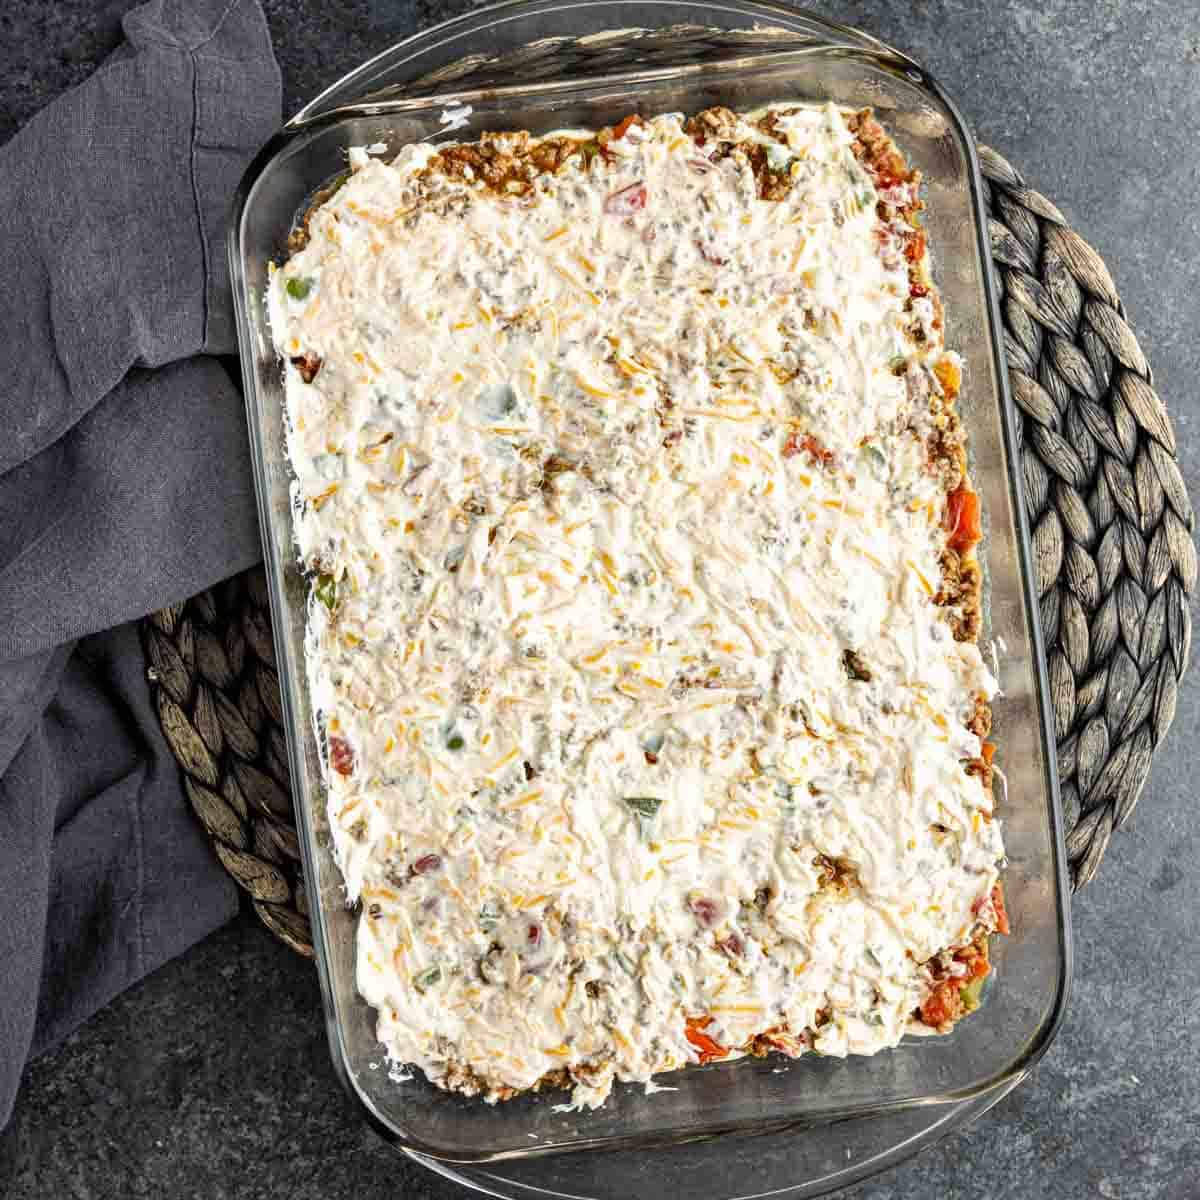 A John Wayne Casserole with cheese and meat layer.